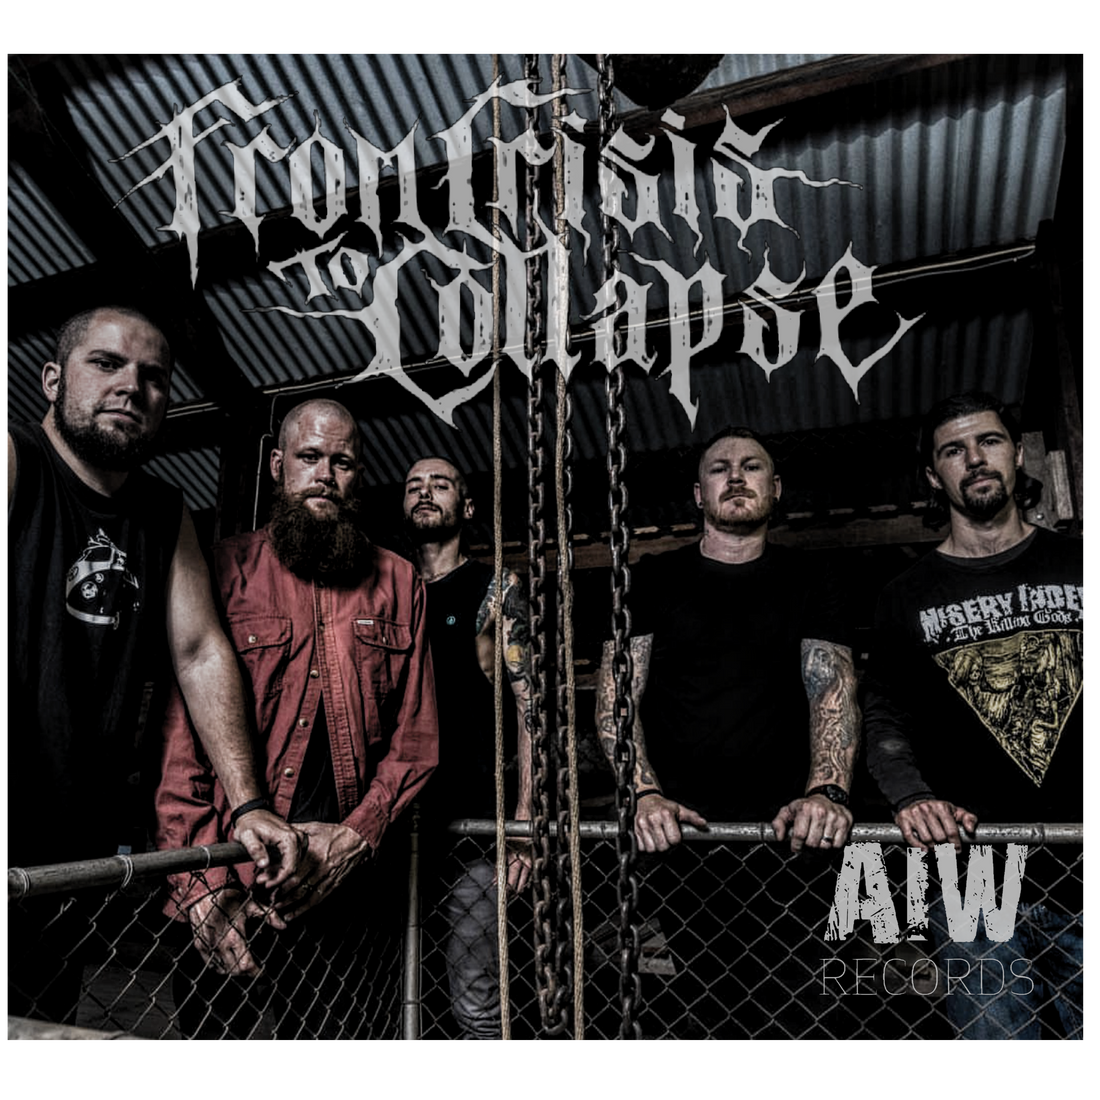 From crisis to collapse - brisbane Australia signs worldwide art is war records deal